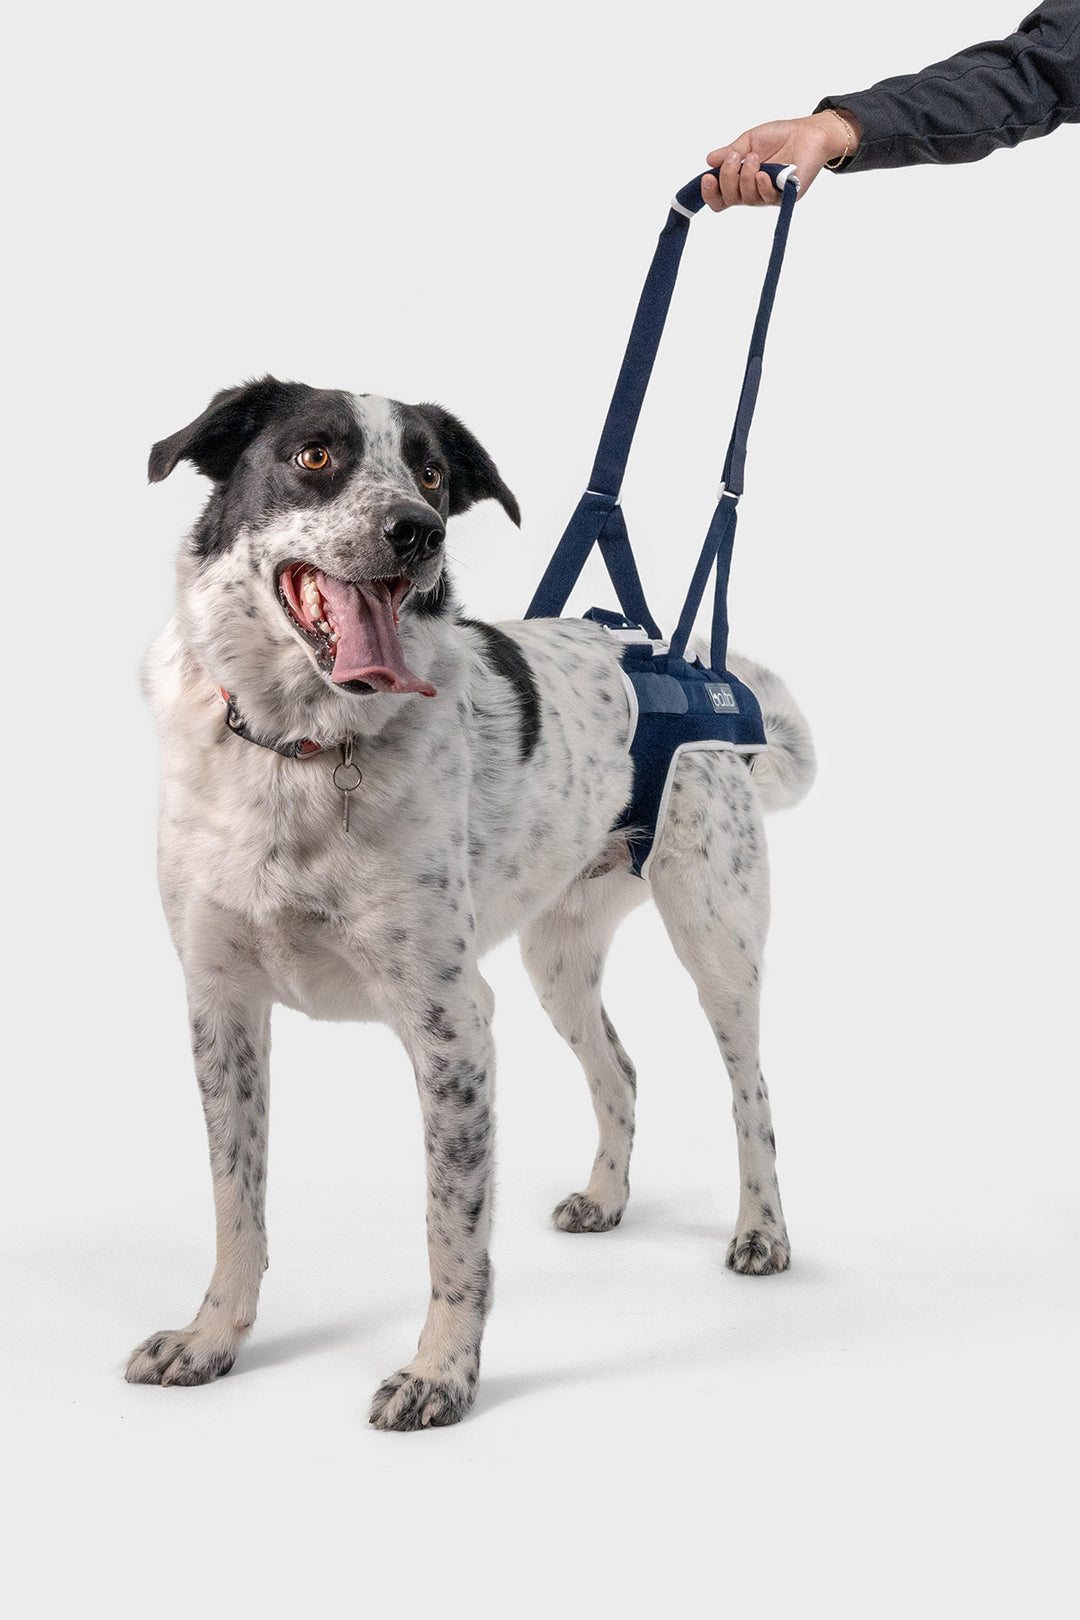 balto up hip brace for canines view of dog wearing brace